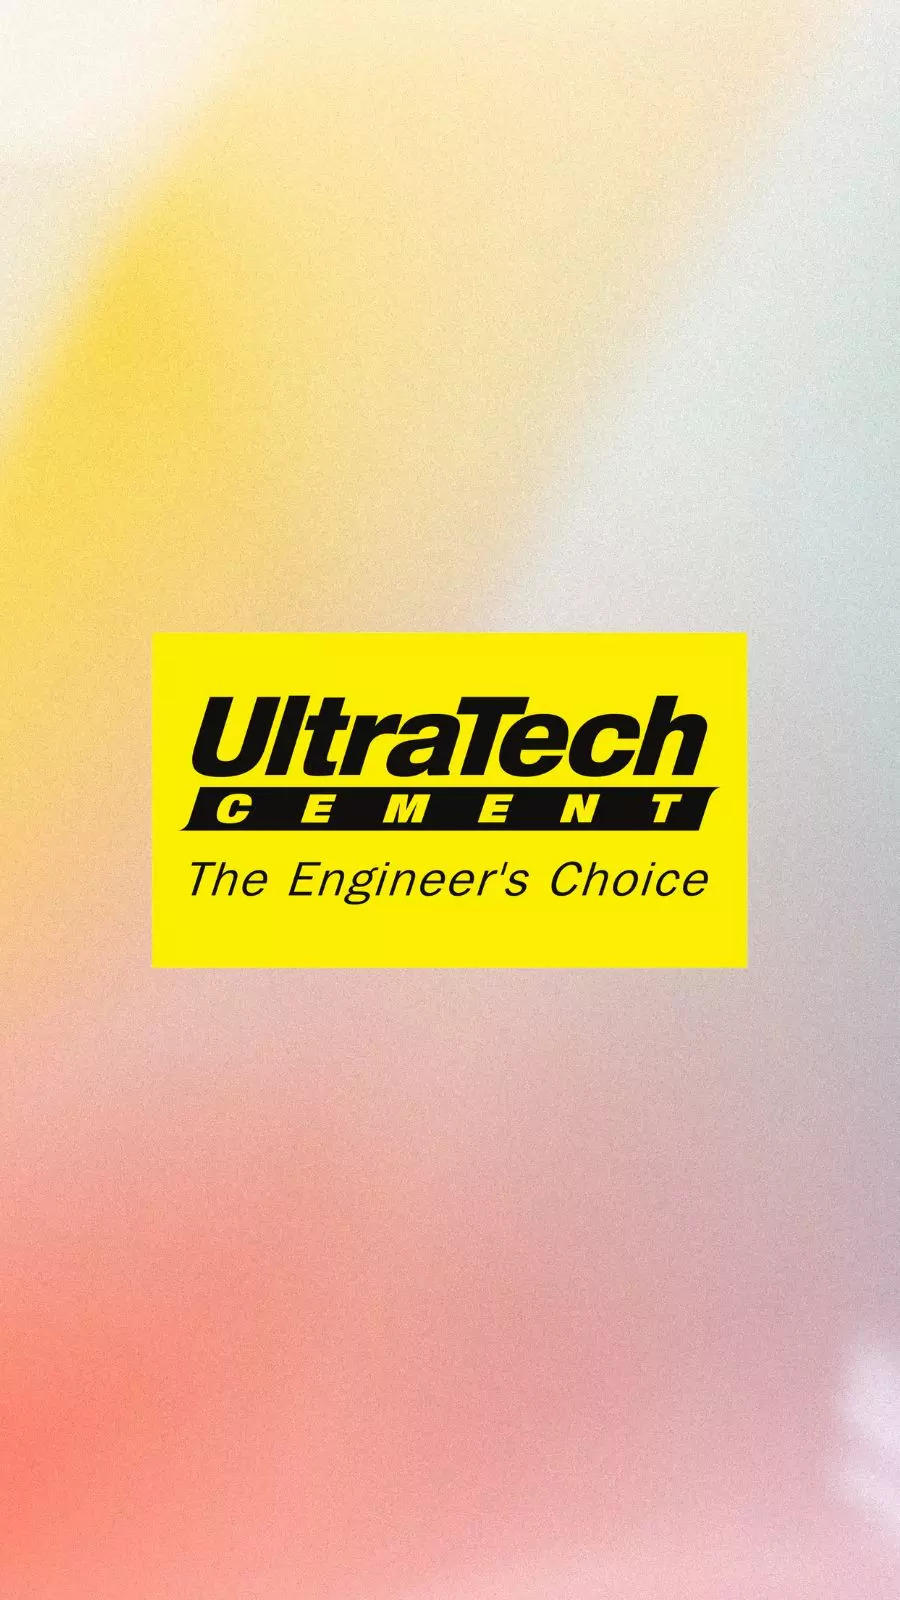 National Retail Summit ( NRS ) - National Retail summit is honoured to  announce their Partner sponsor @ultratech.cement for the 13th edition of  this prestigious event. Ultratech is considered India's no. 1